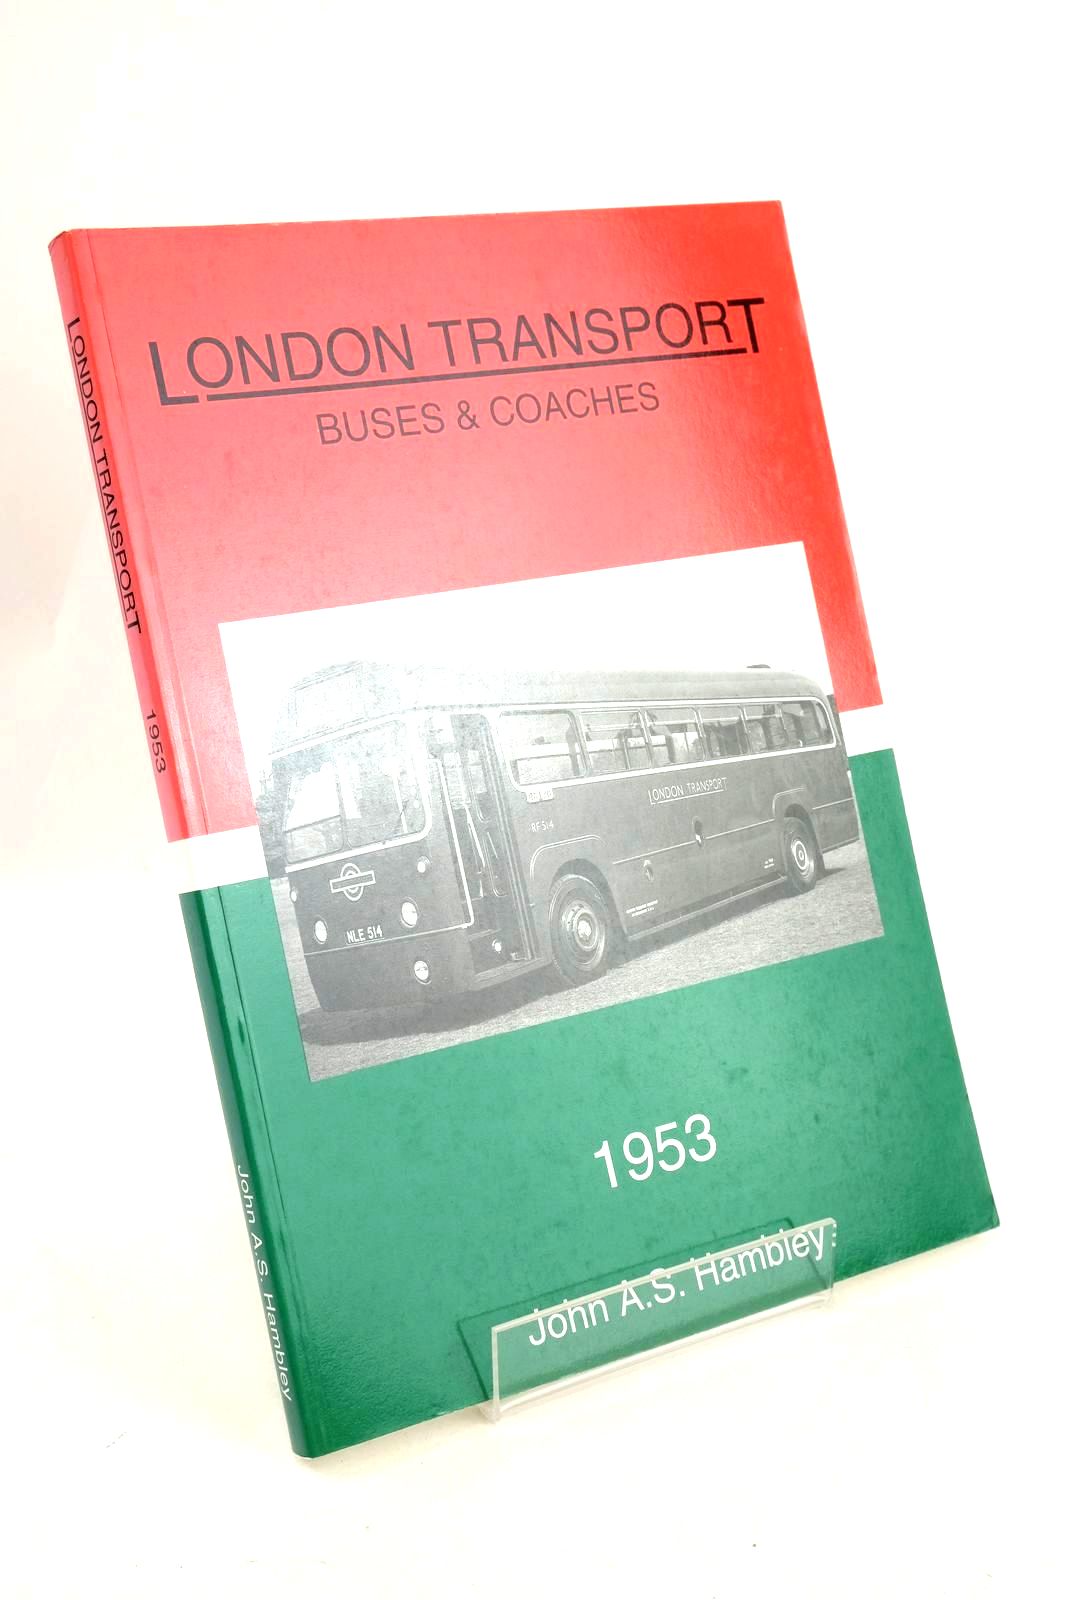 Photo of LONDON TRANSPORT BUSES & COACHES 1953 written by Hambley, John A.S. published by Images Publishing (STOCK CODE: 1327387)  for sale by Stella & Rose's Books